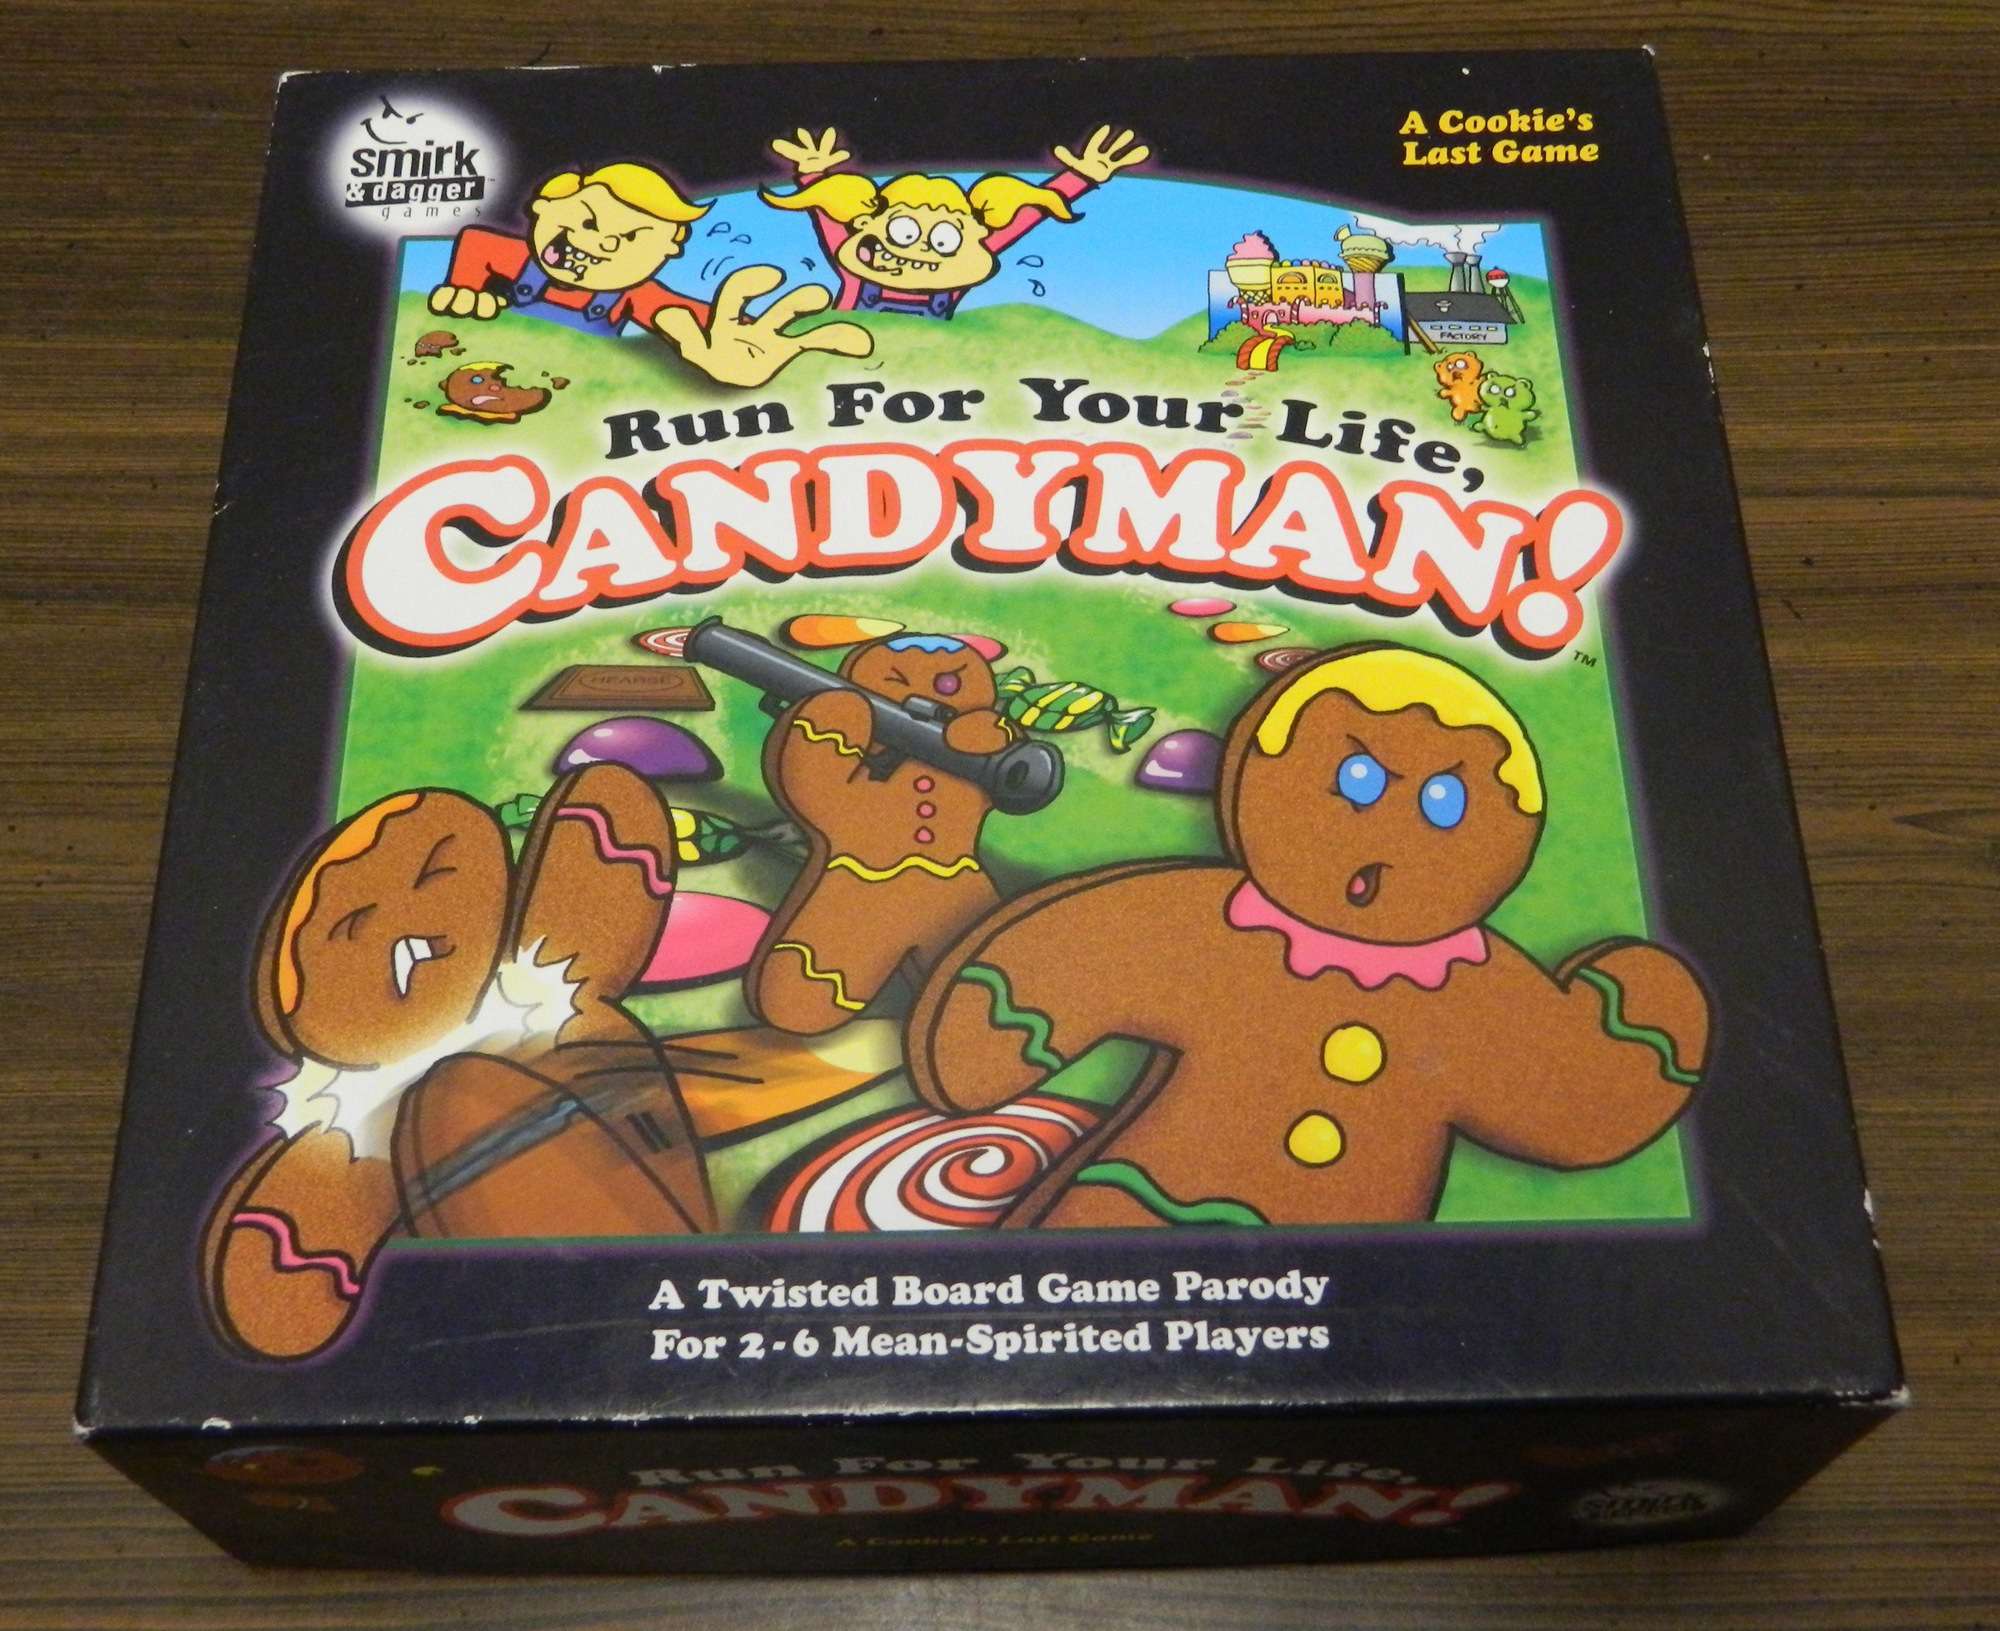 Run For Your Life, Candyman Review and Rules